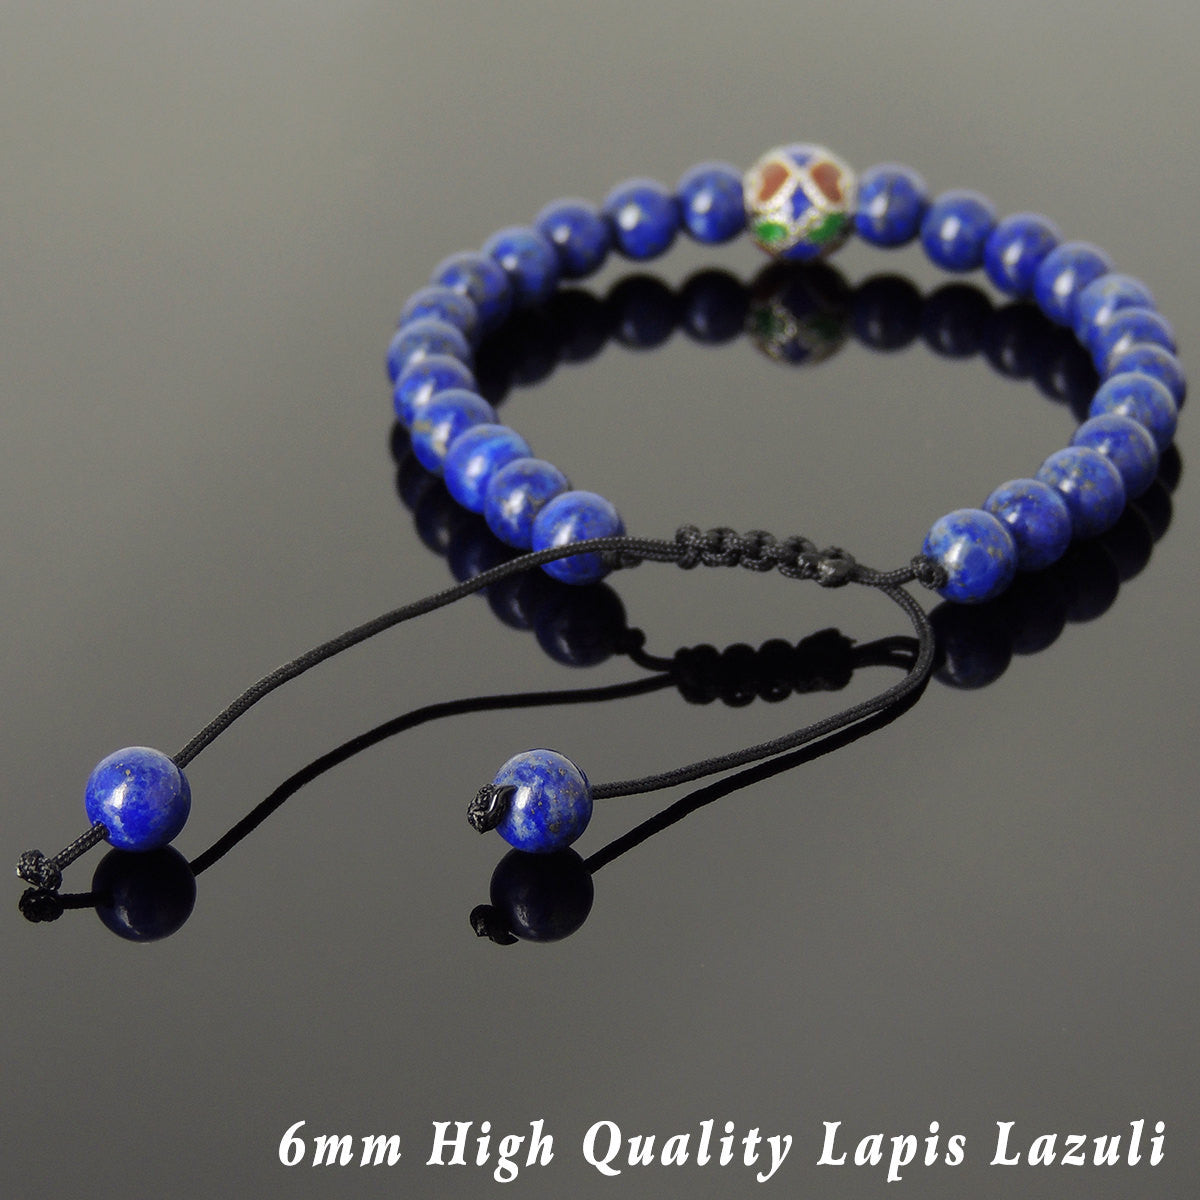 6mm Lapis Lazuli Adjustable Braided Bracelet with S925 Sterling Silver Round Hand Painted Bead - Handmade by Gem & Silver BR799